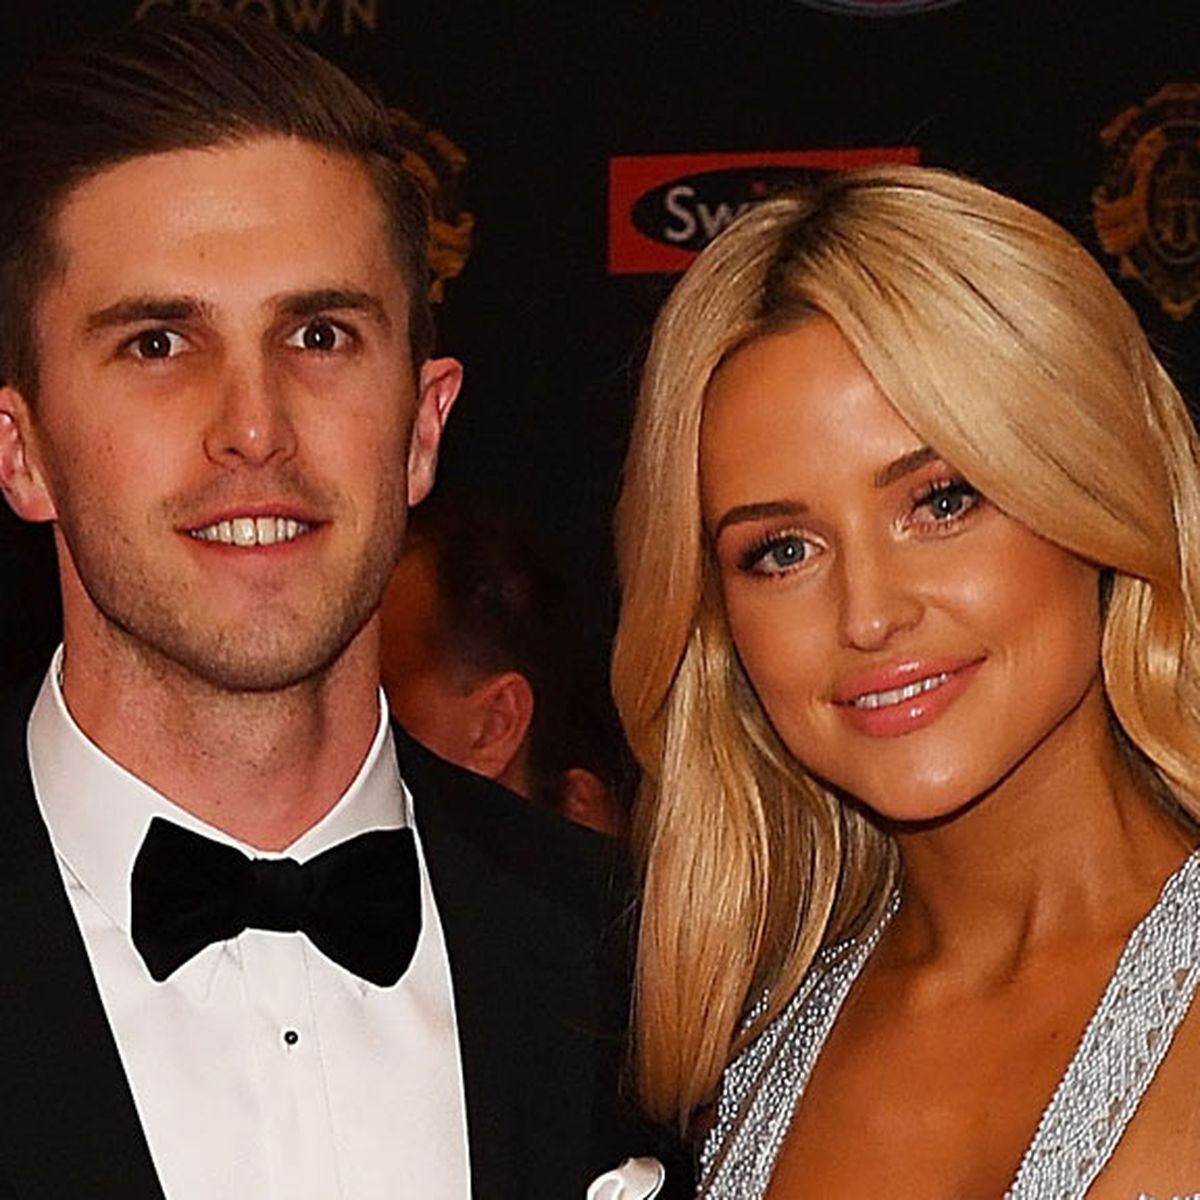 Marc Murphy, Jessie Murphy: Glamour AFL couple on how they met